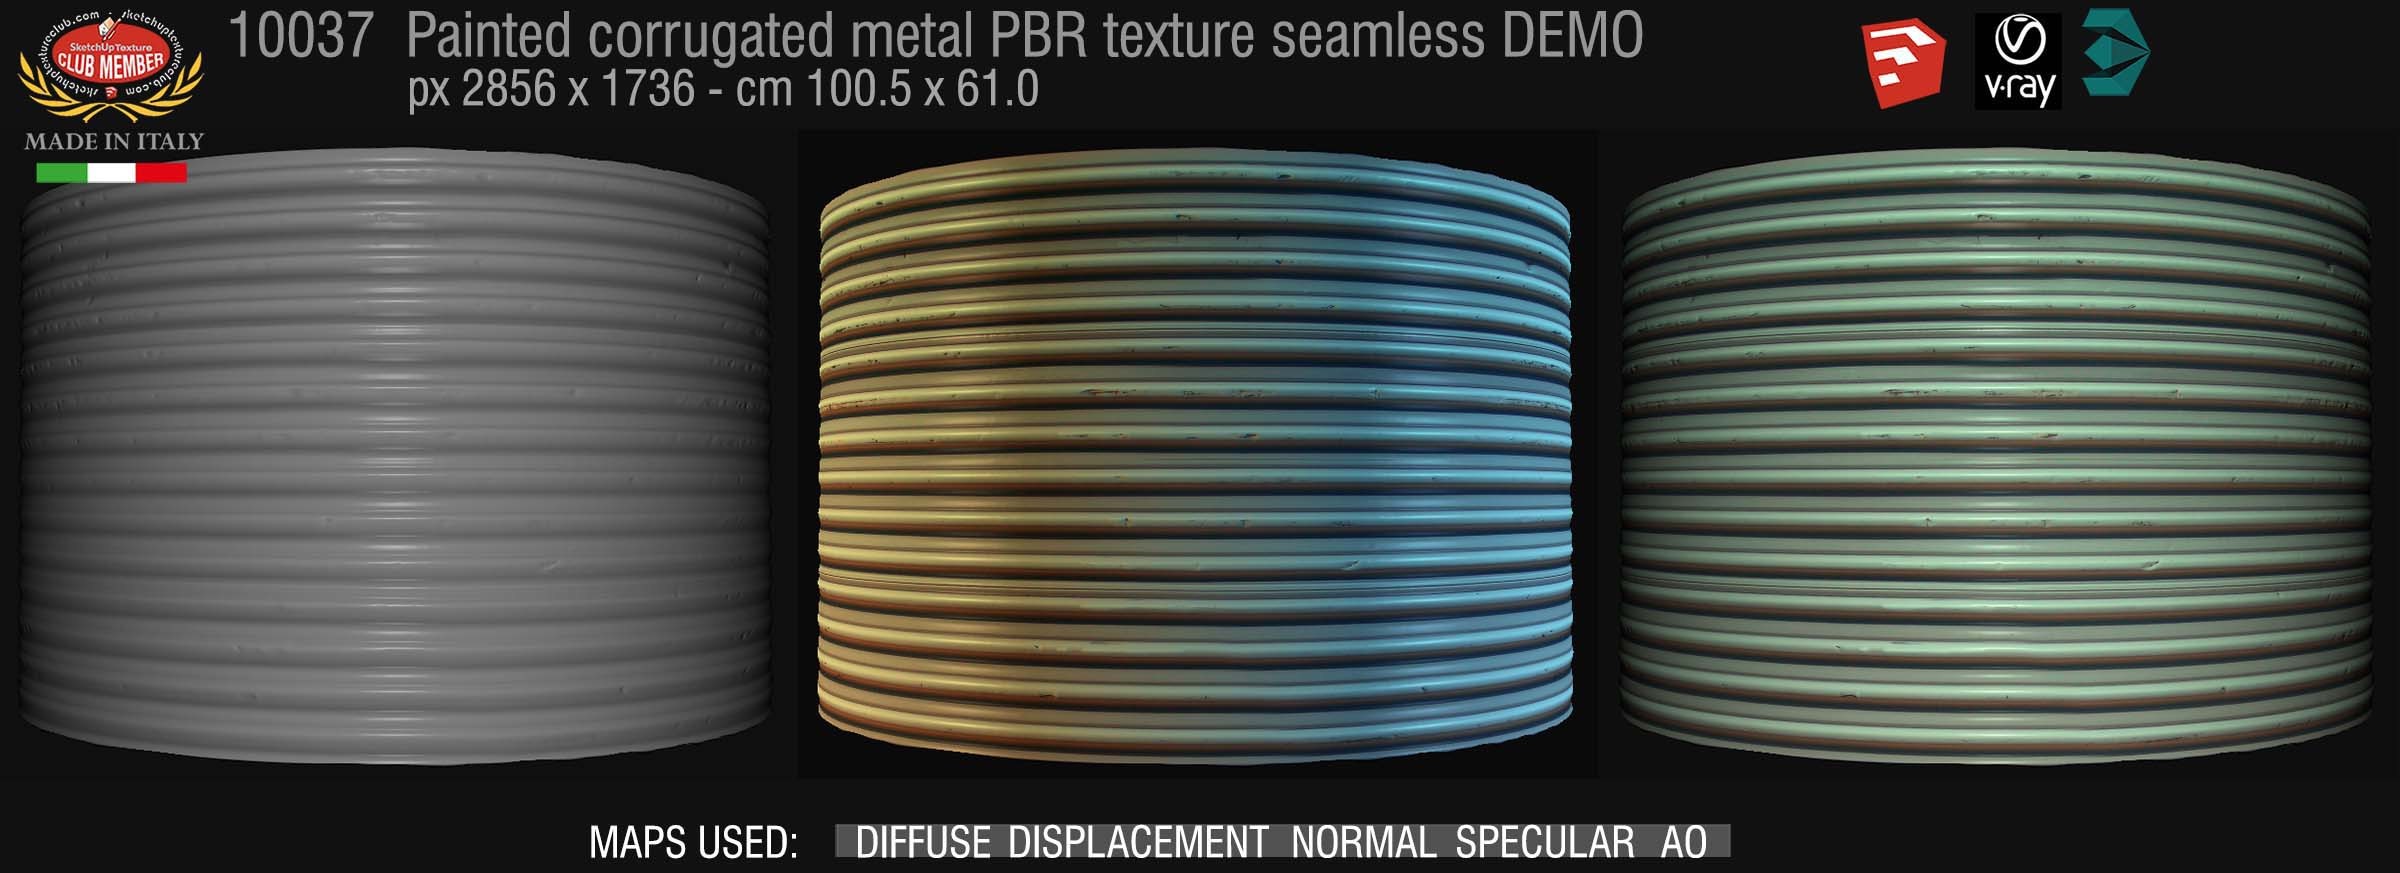 10037 Painted corrugated metal PBR texture seamless DEMO